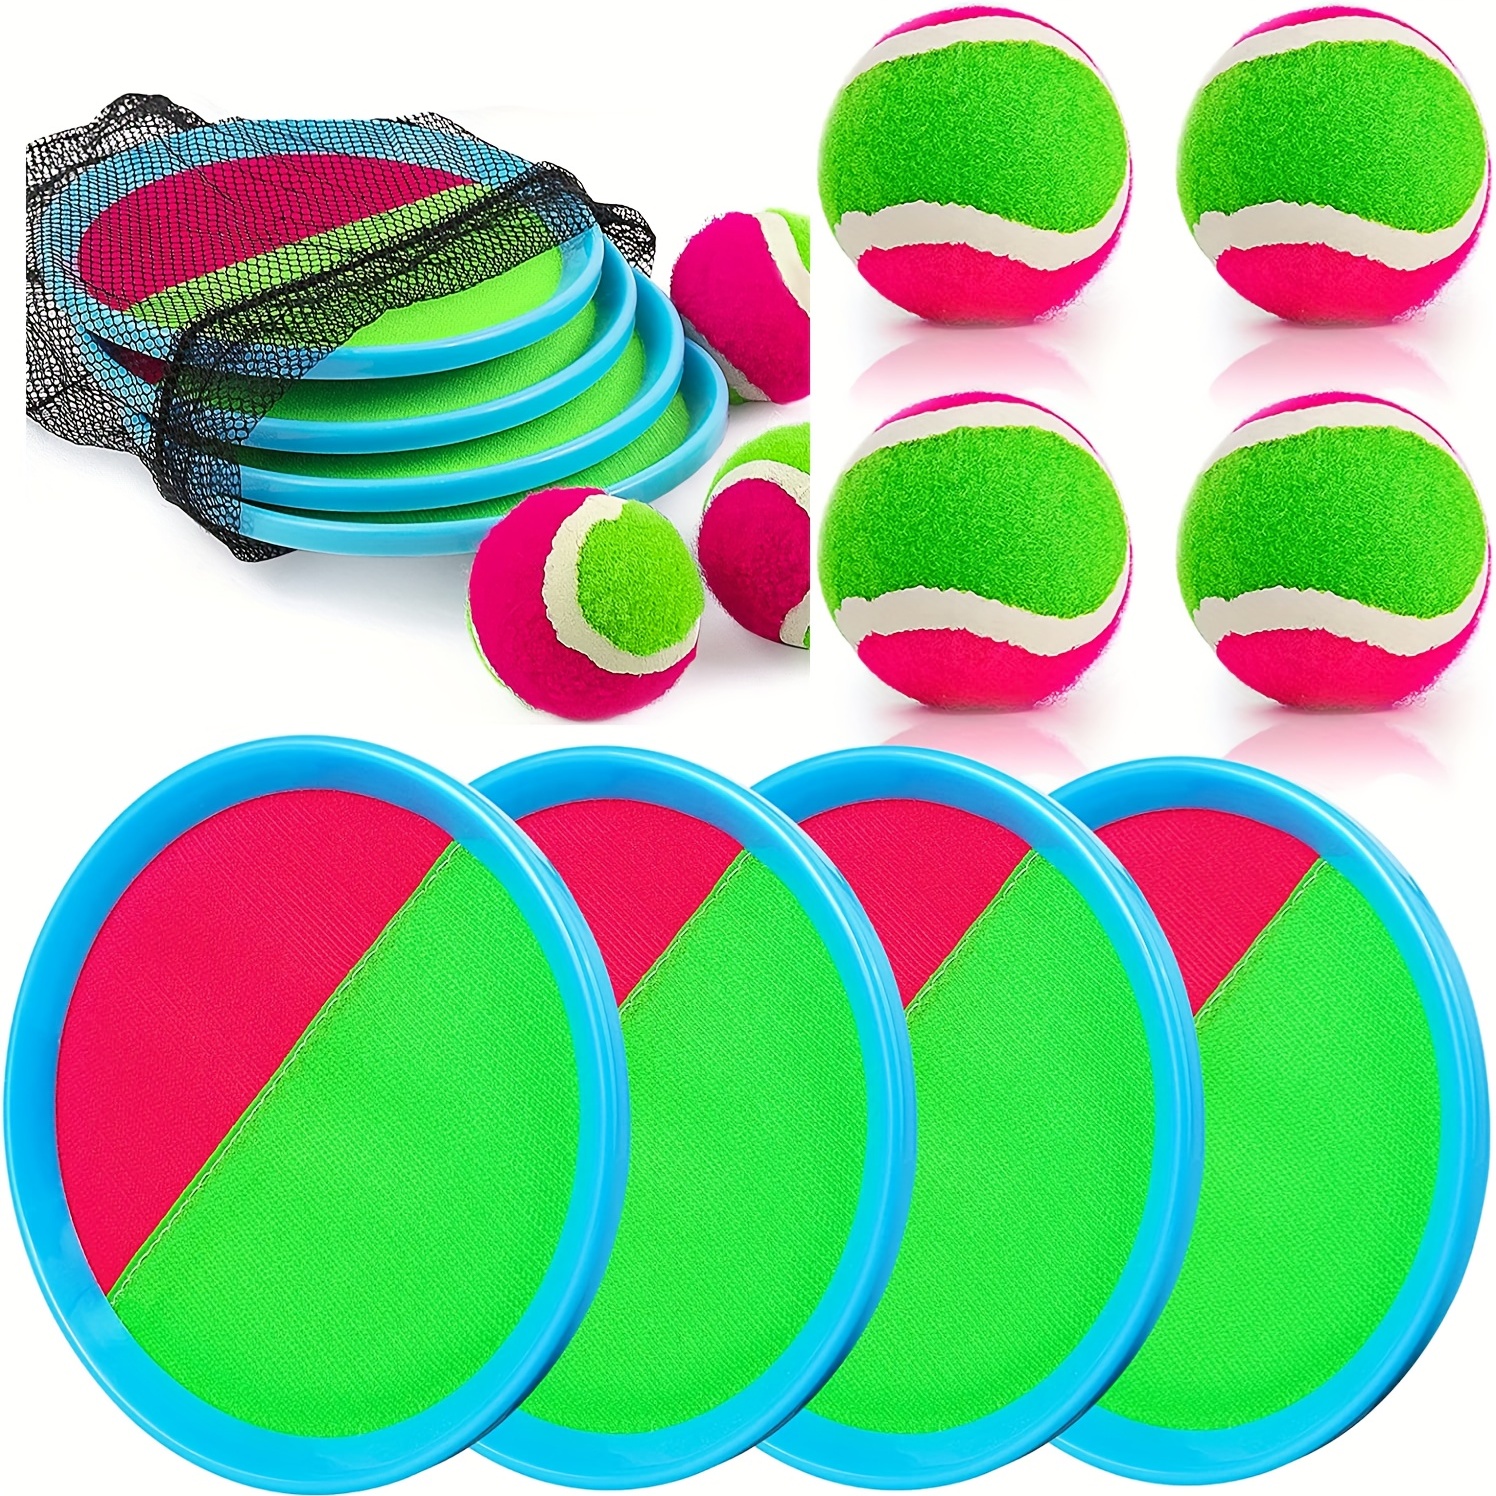 Sports Plastic Hula Hoop, Exercise Ring for Fitness with 58.5 CM Diameter  for Boys, Girls, Kids and Adults (Multicolor)